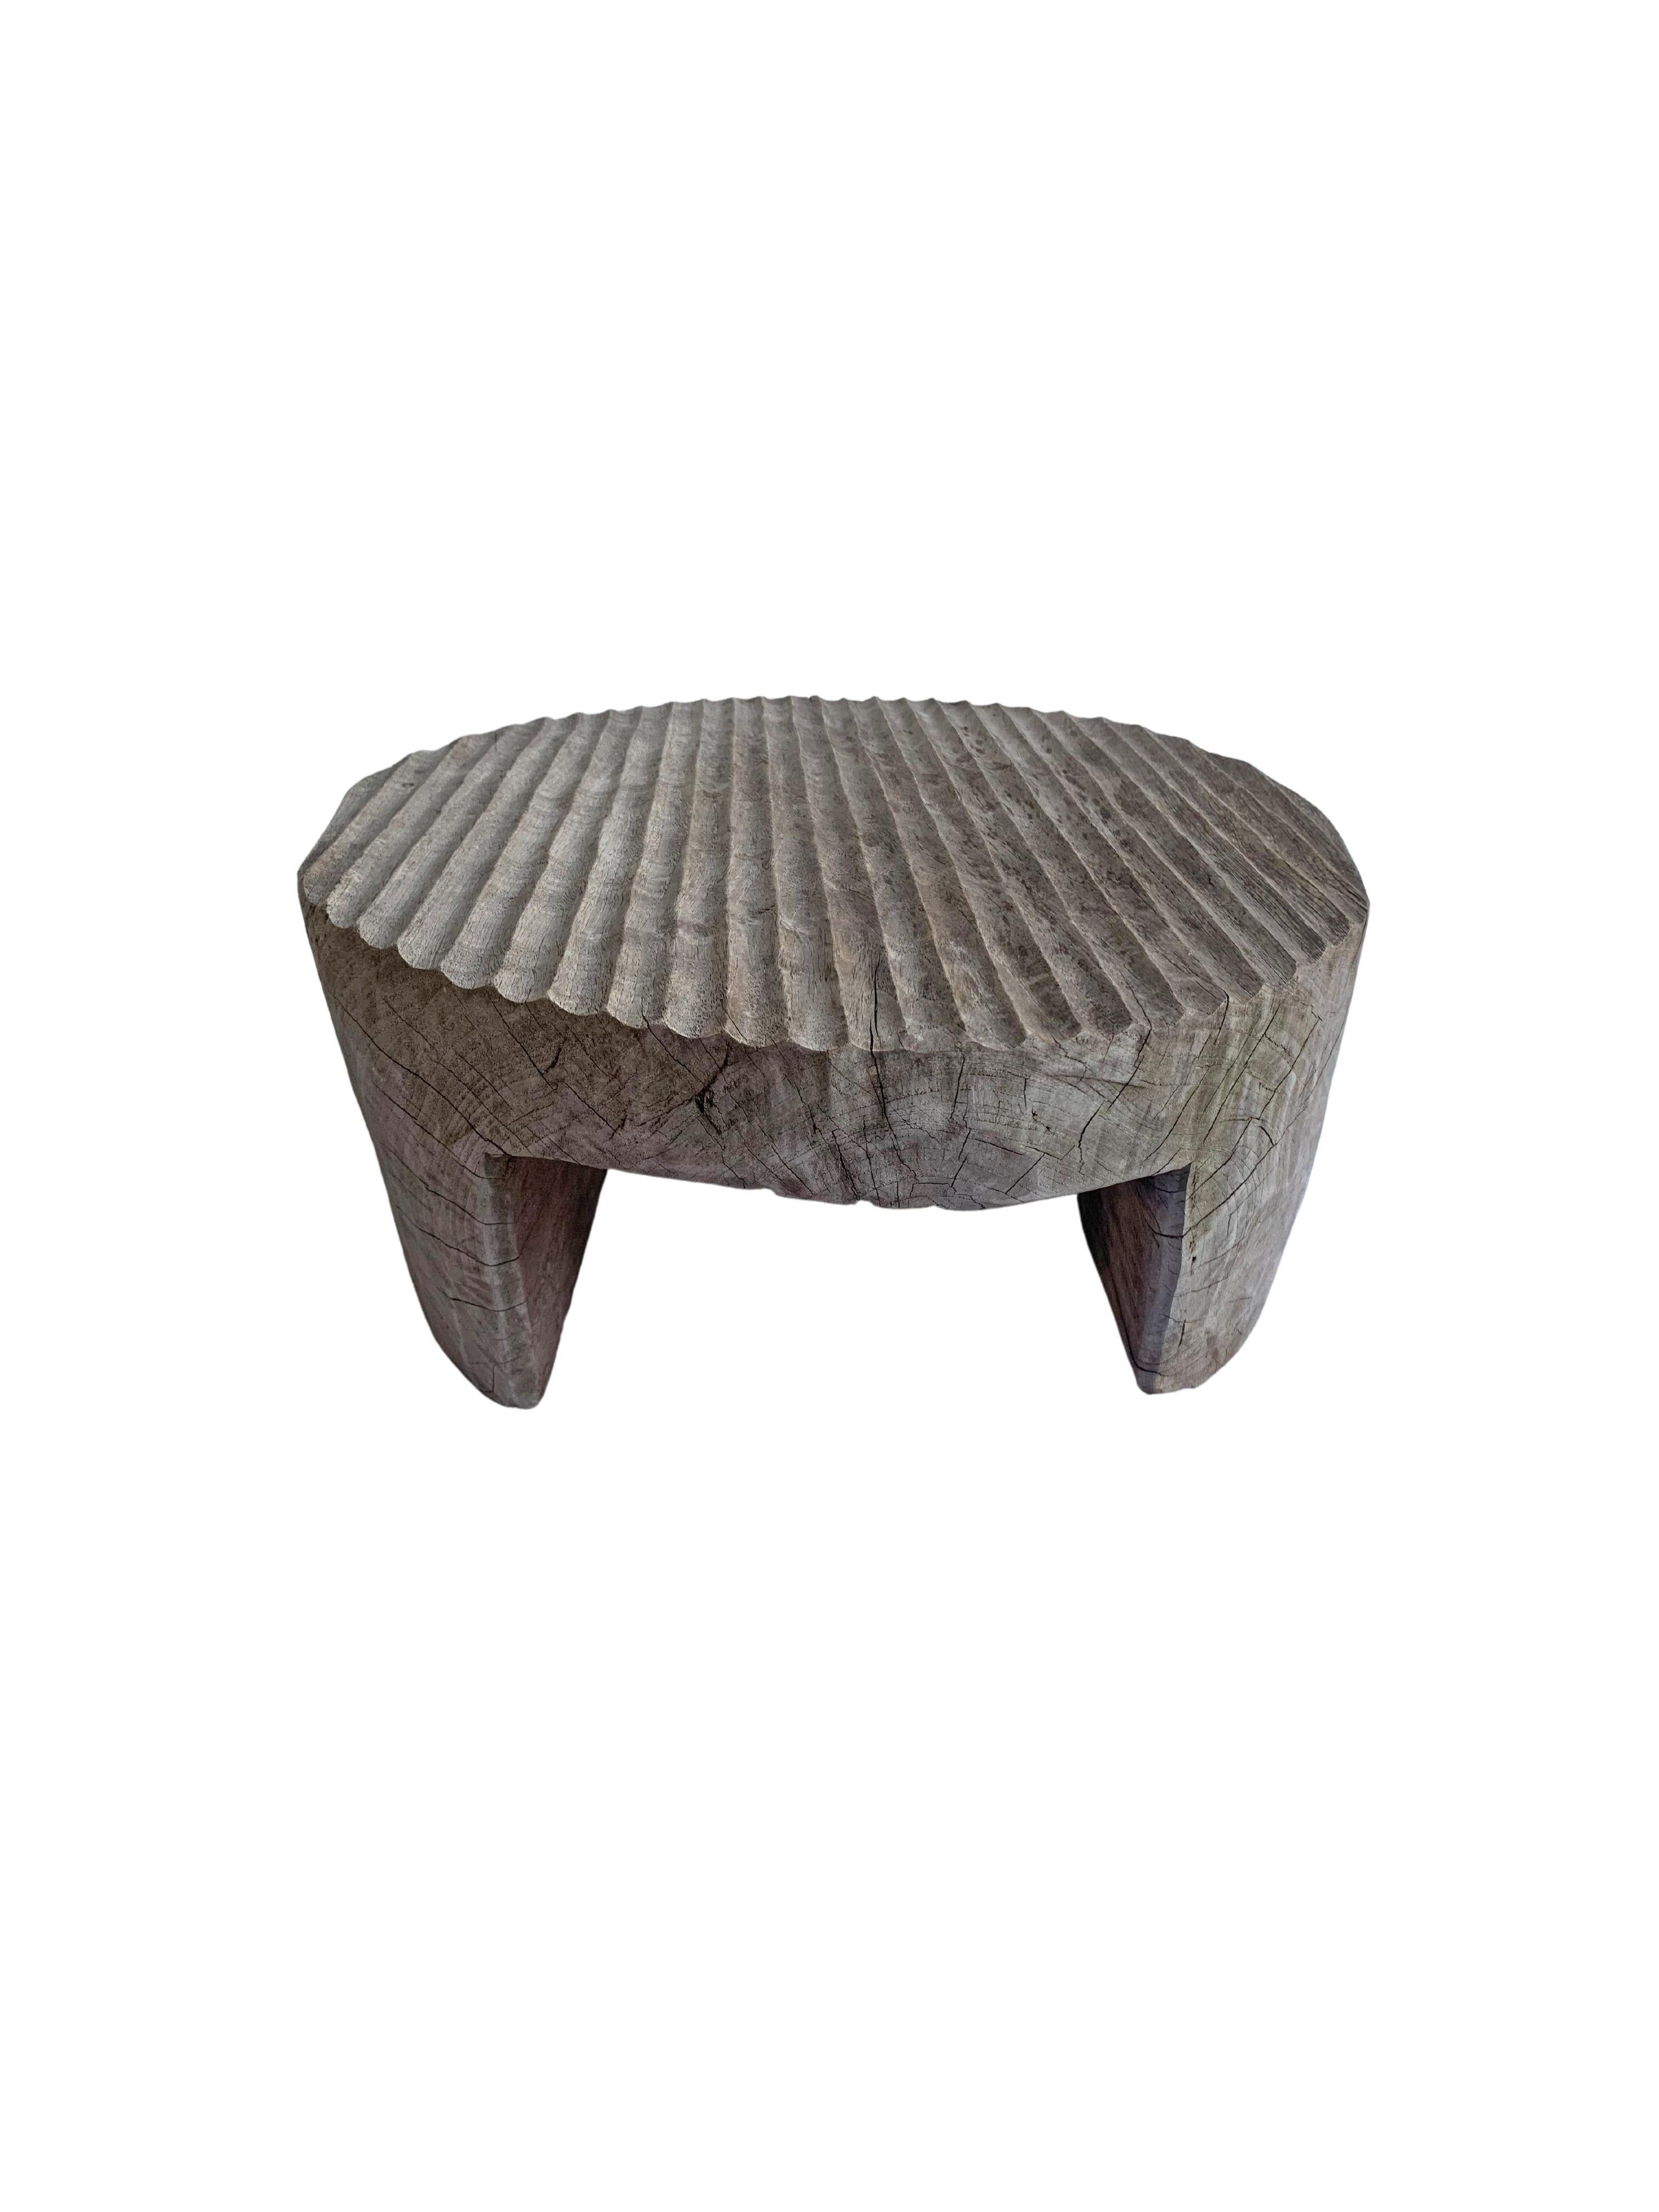 This side table was crafted from a single block of teak wood. A wonderfully sculptural round side table. Its neutral pigment and subtle wood texture makes it perfect for any space. It features a carved ribbed design on its topside which adds to its